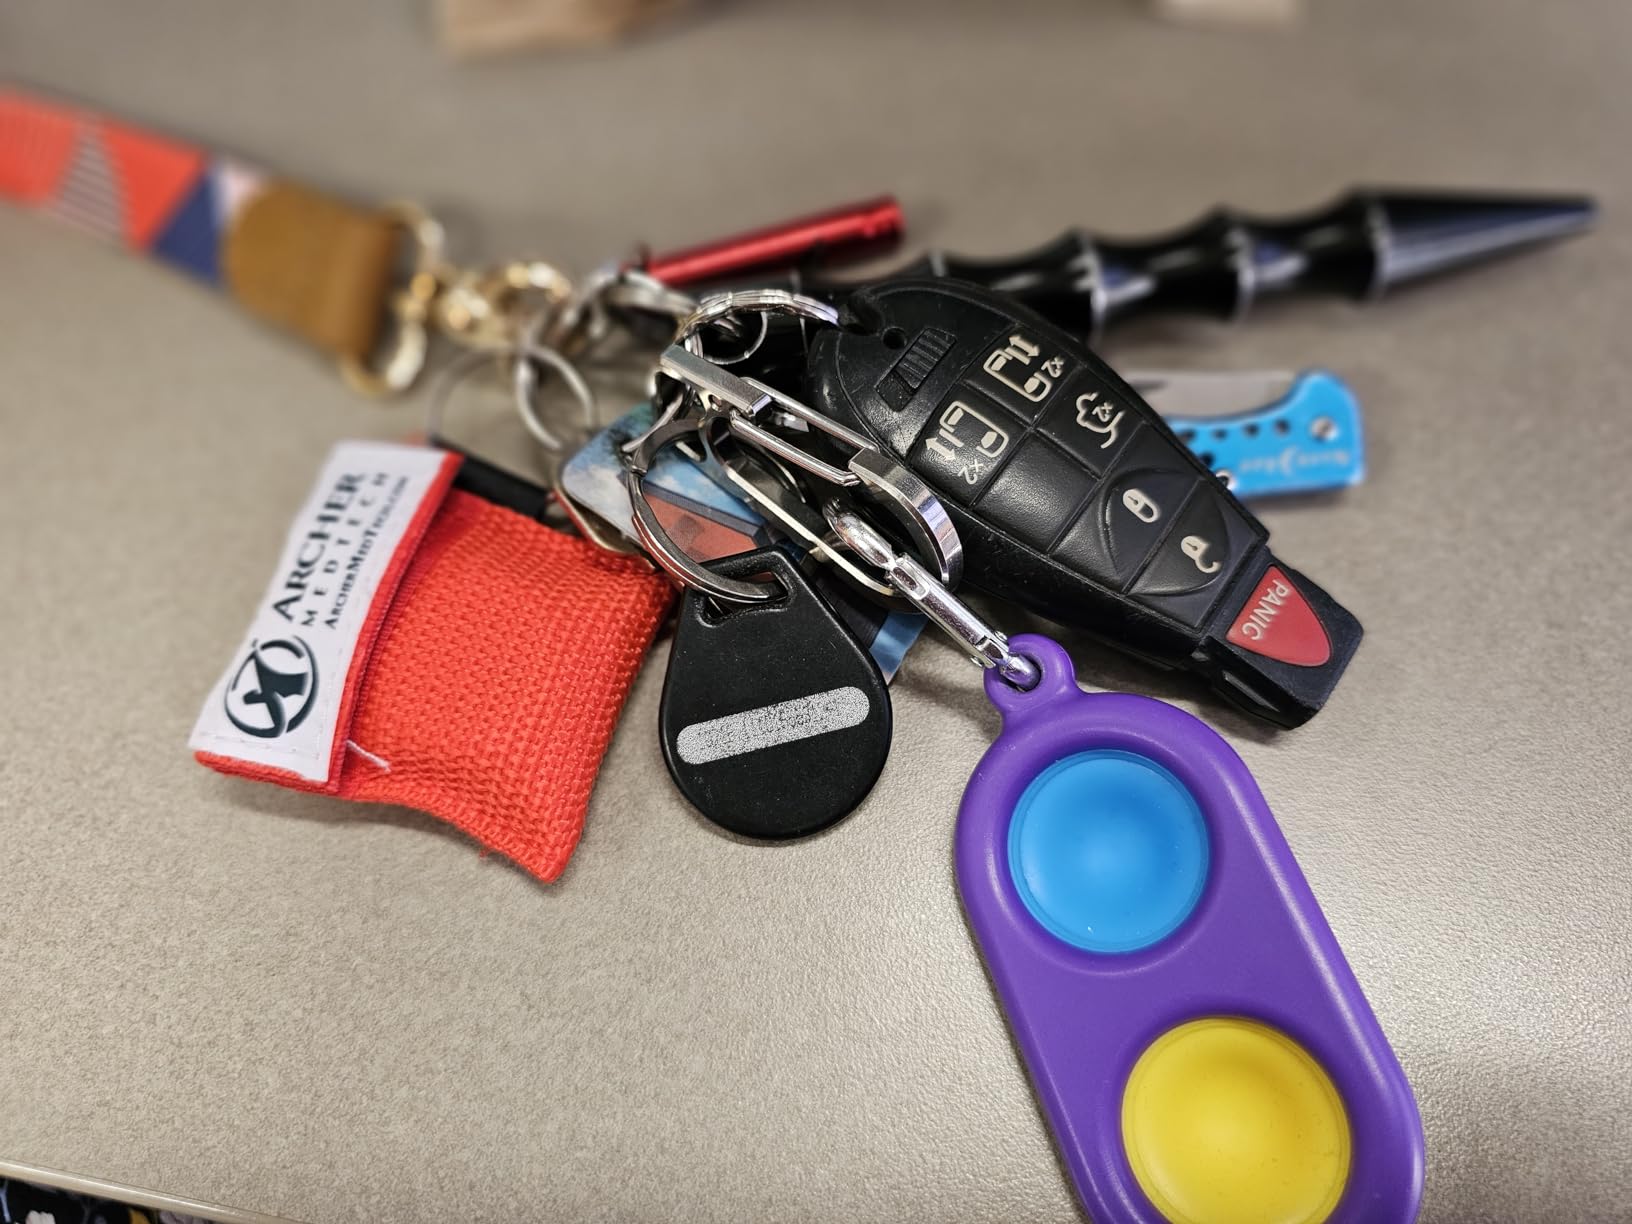 Great addition to key chain for just in case